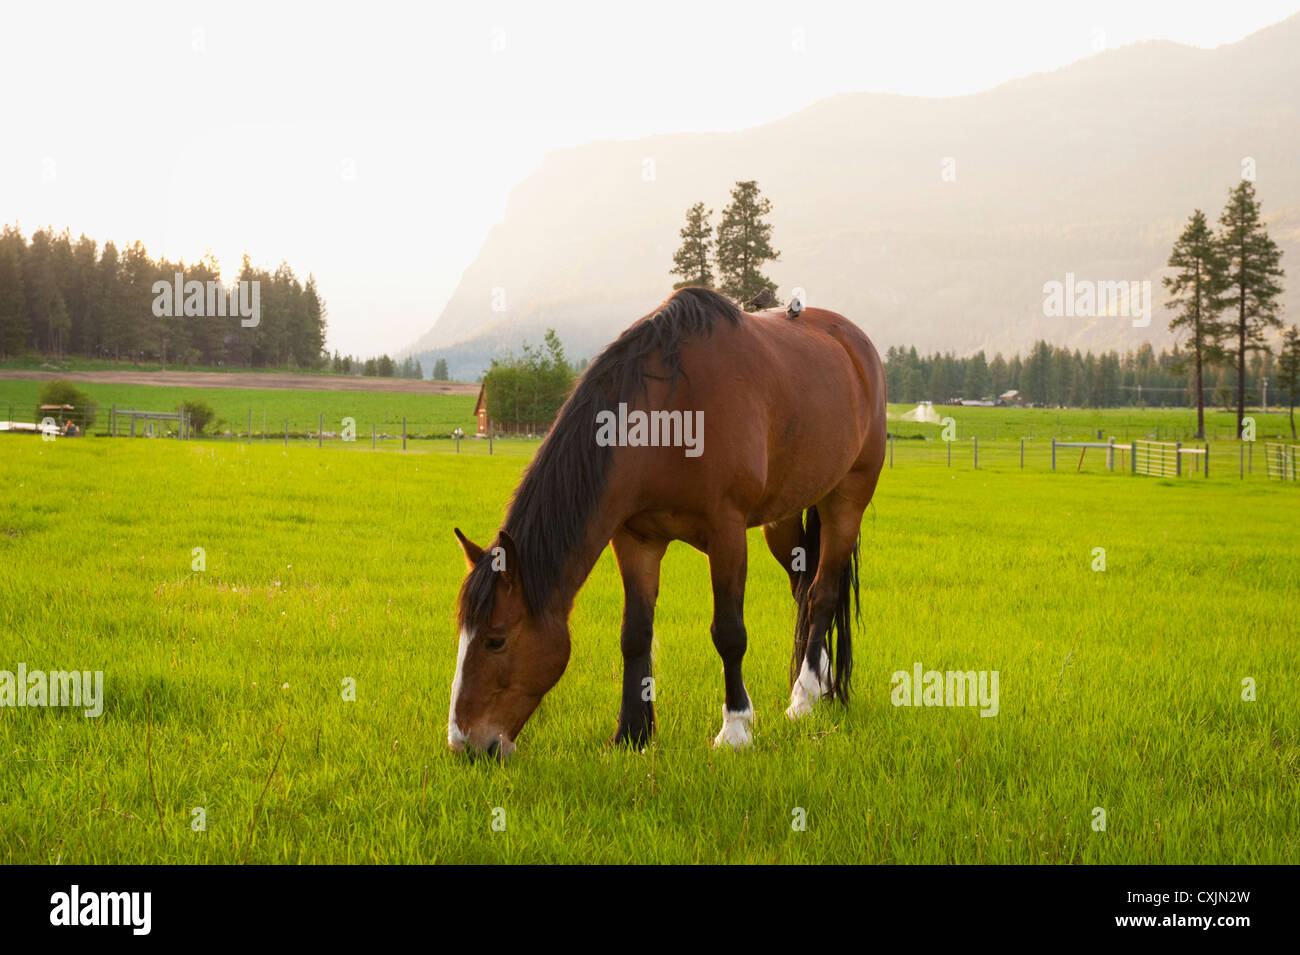 Horses grazing on a pasture in the historic Methow Valley of eastern Washington near the town of Mazama. Stock Photo